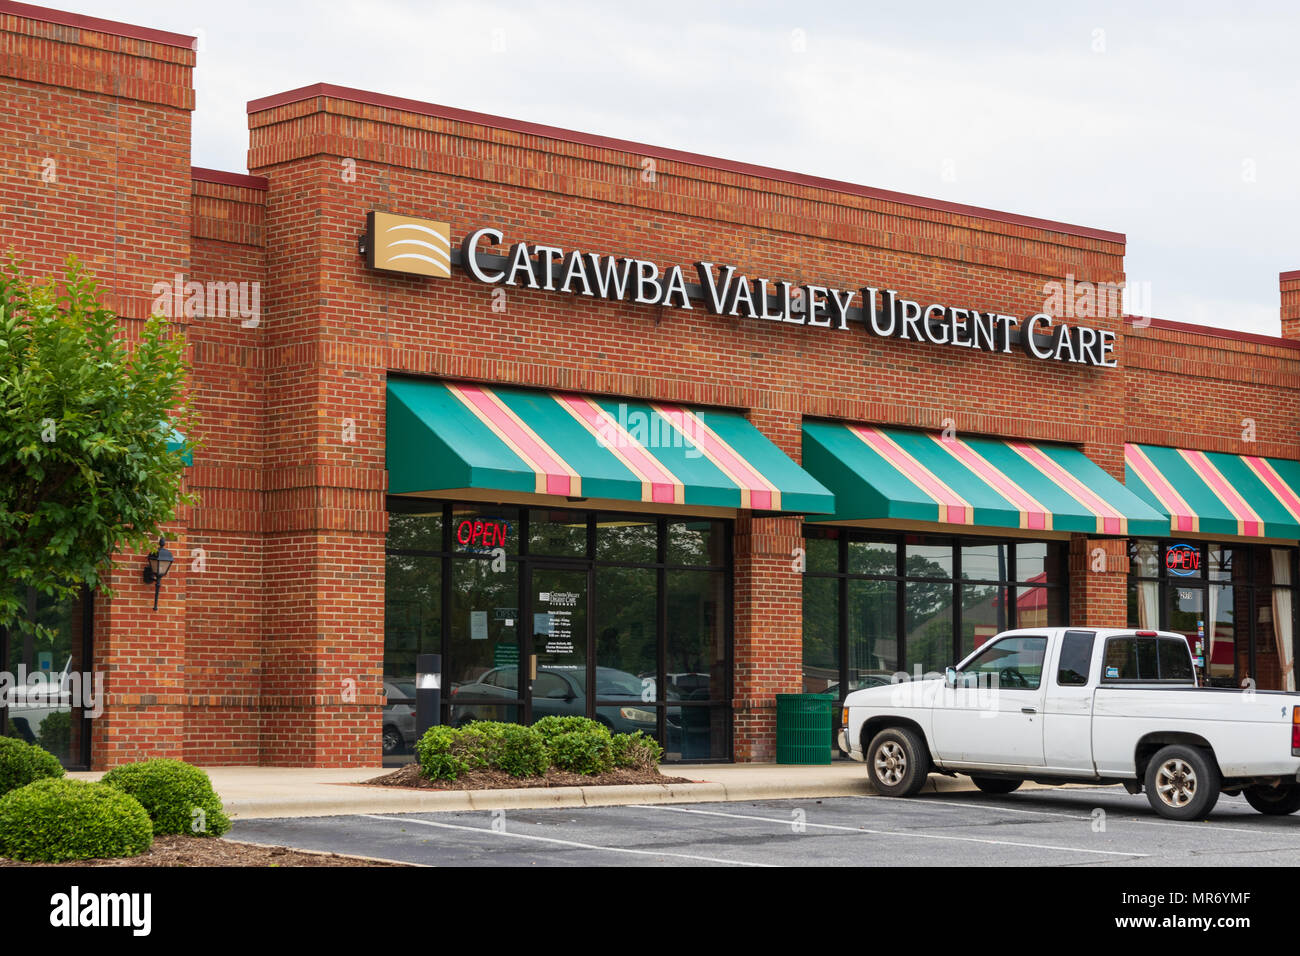 hickory nc usa 21 may 18 private emergency health services are becoming more common in the us such as this catawba valley urgent care facility MR6YMF